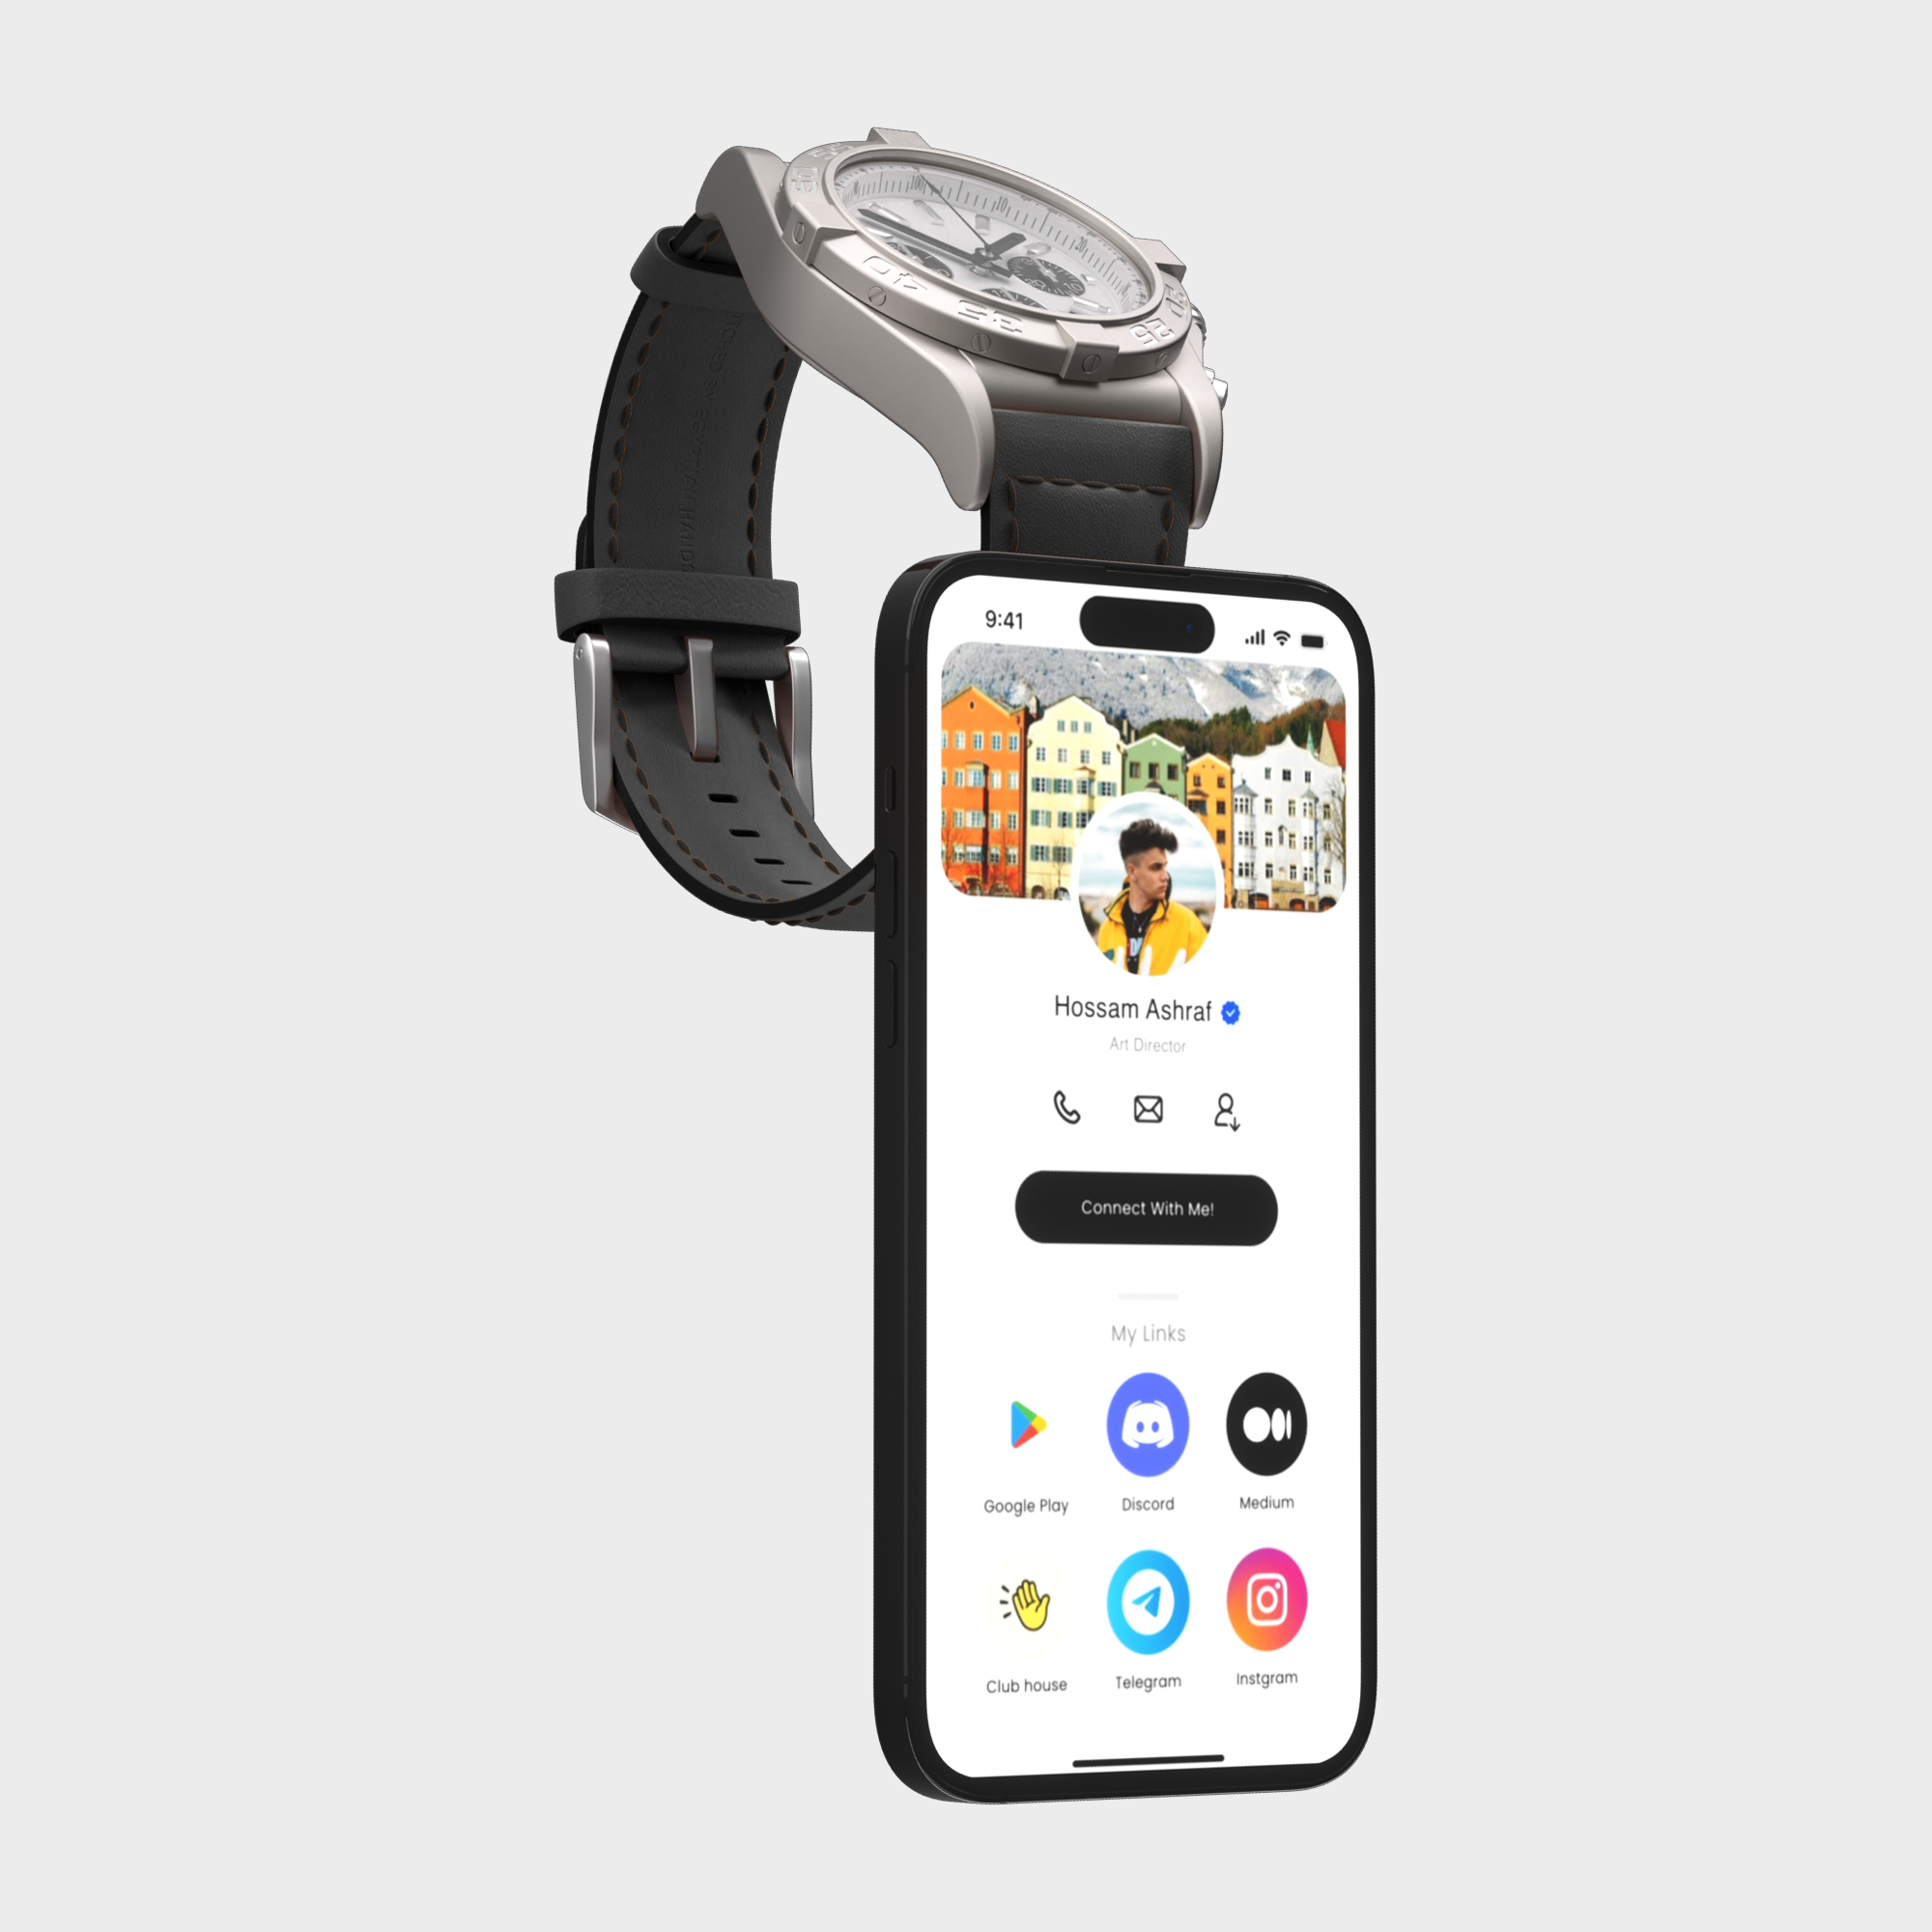 Luxury watch resting on a smartphone displaying social media profile and apps.